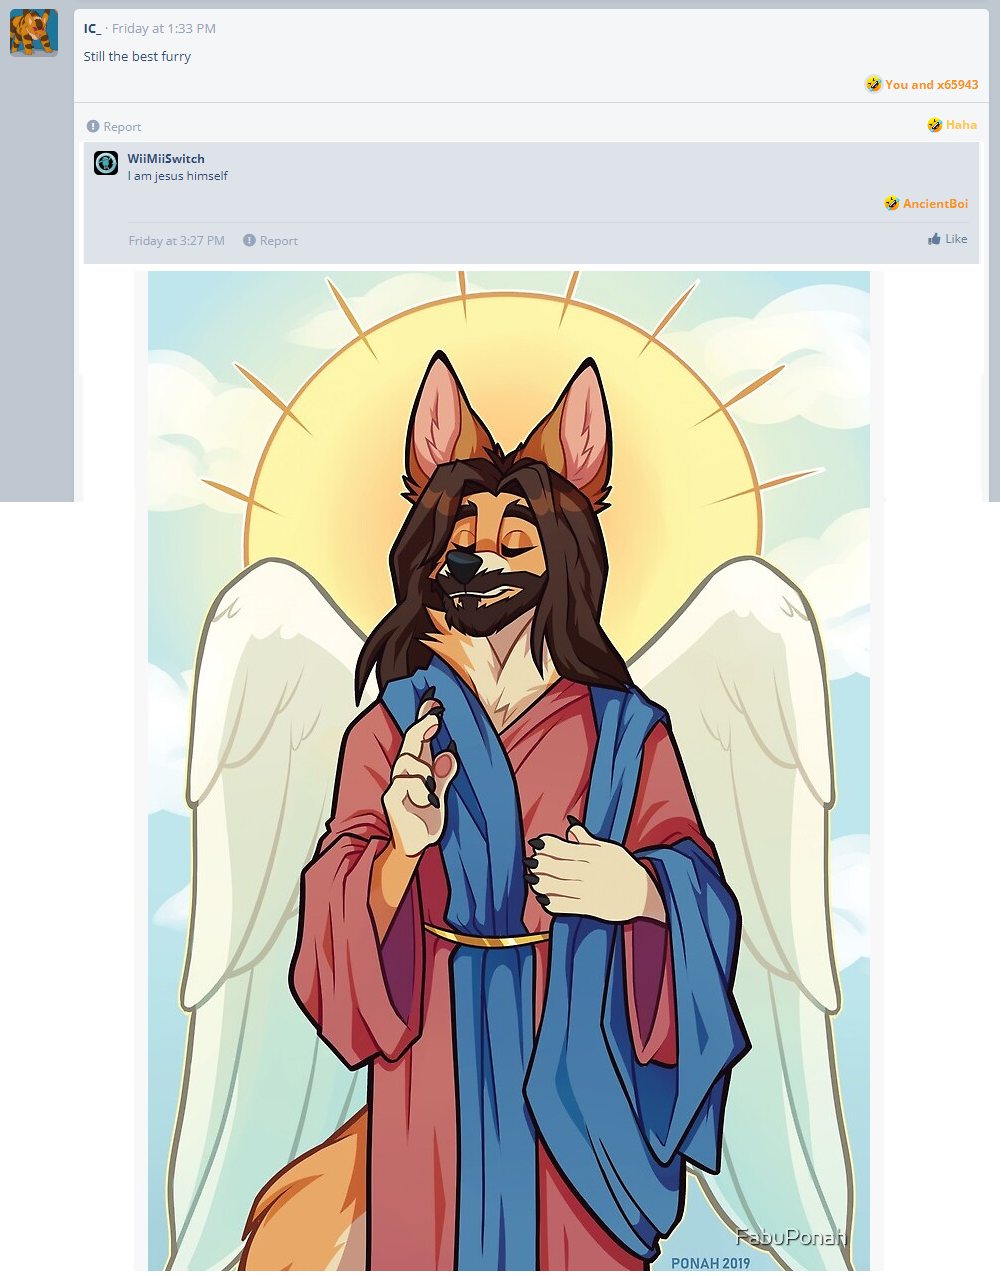 So Furry Jesus?  - The Independent Video Game Community